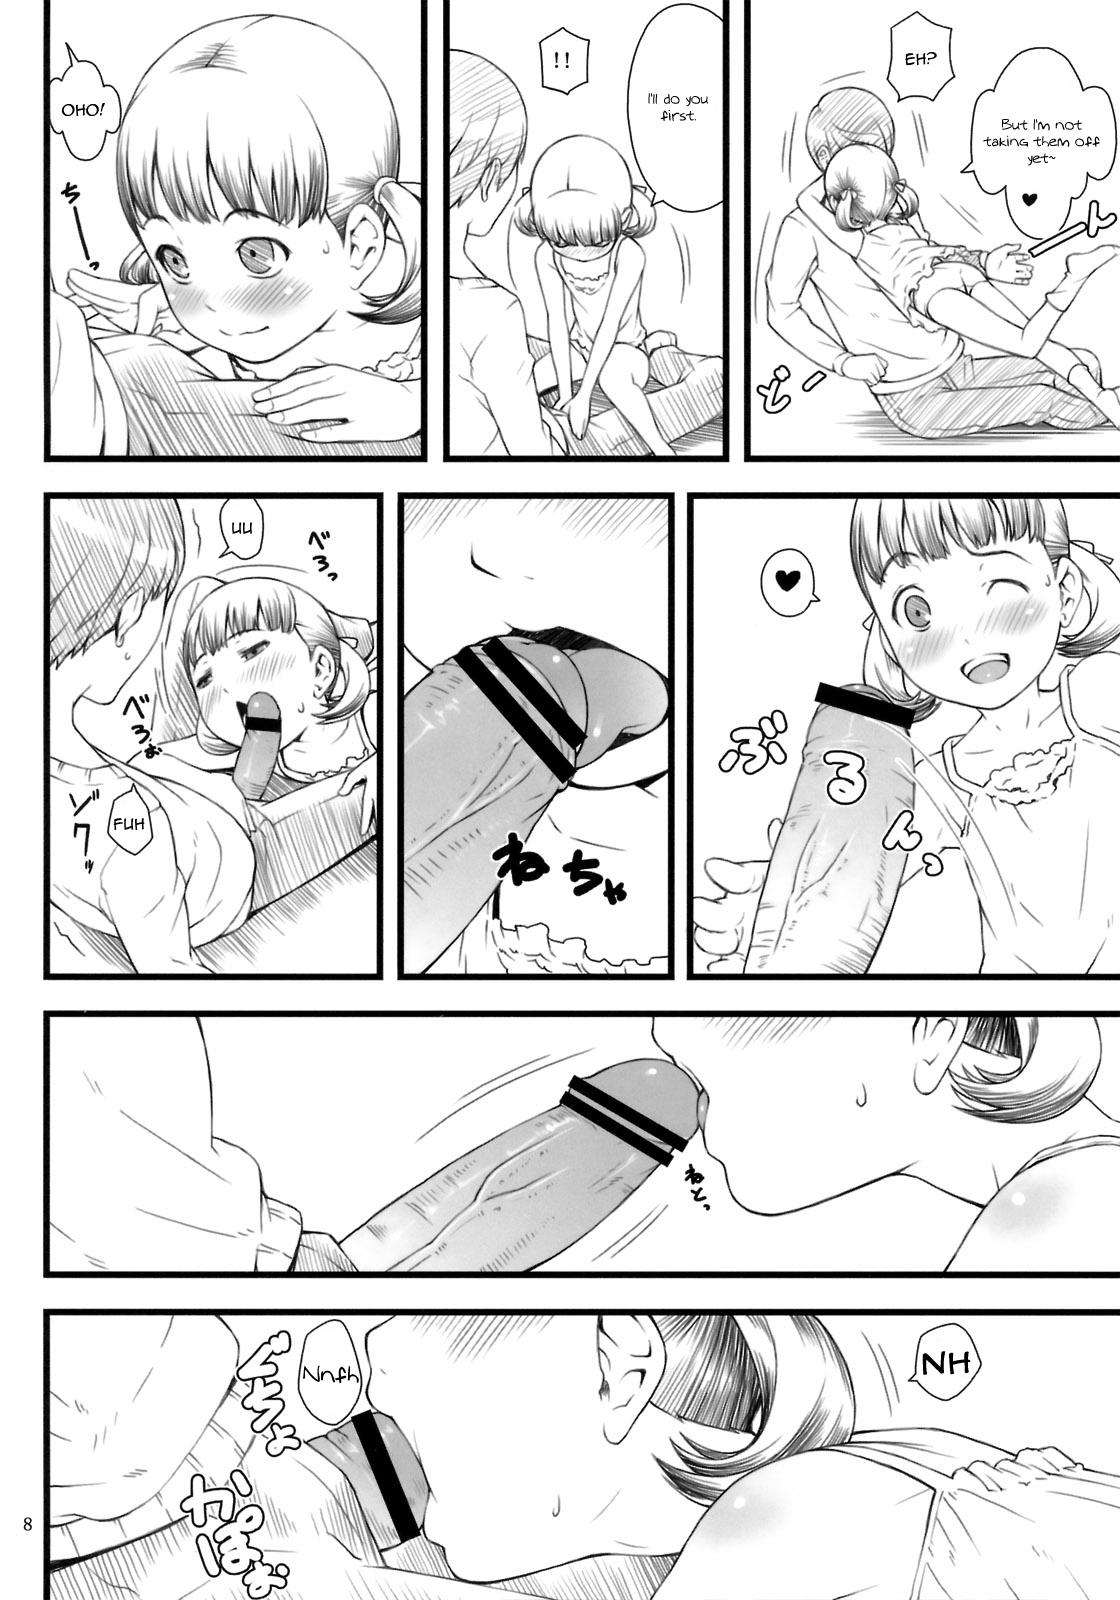 Real Couple everyday nanako life! - Persona 4 Belly - Page 7